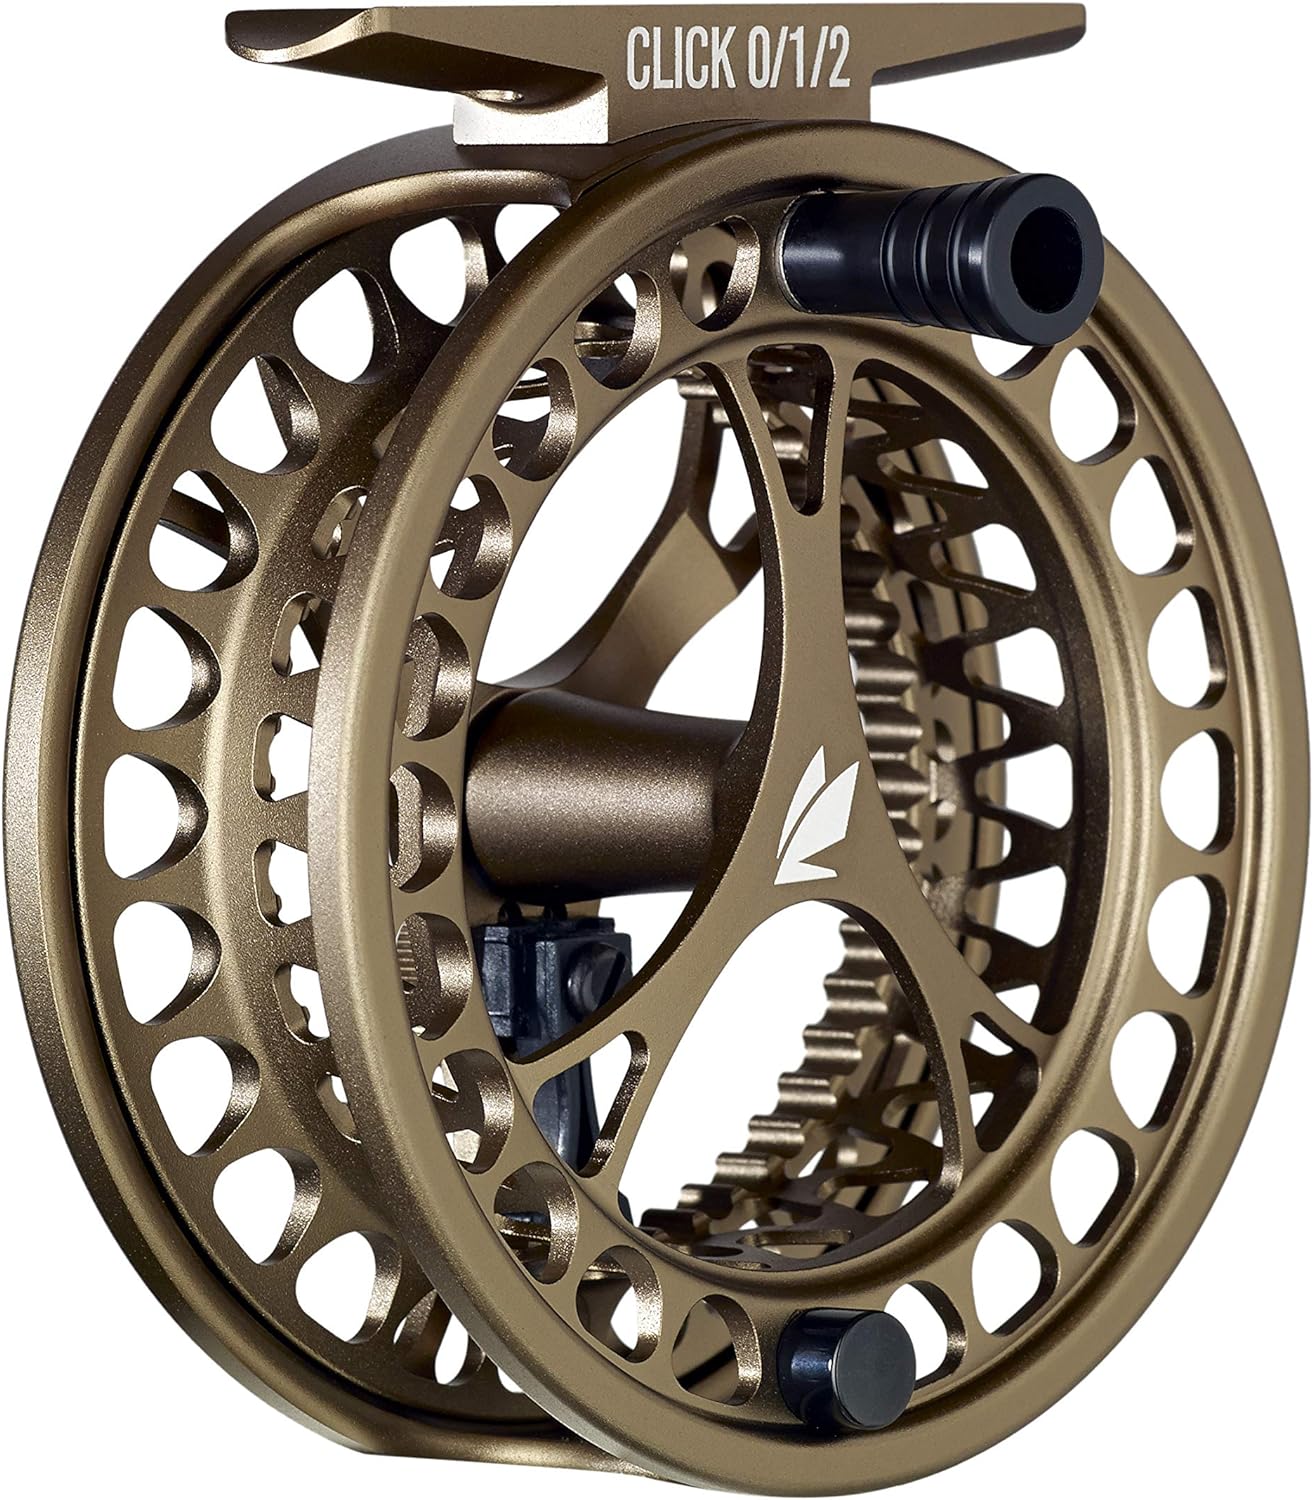 Sage Click Series Fly Fishing Reel with Rio Backing Review - TU420